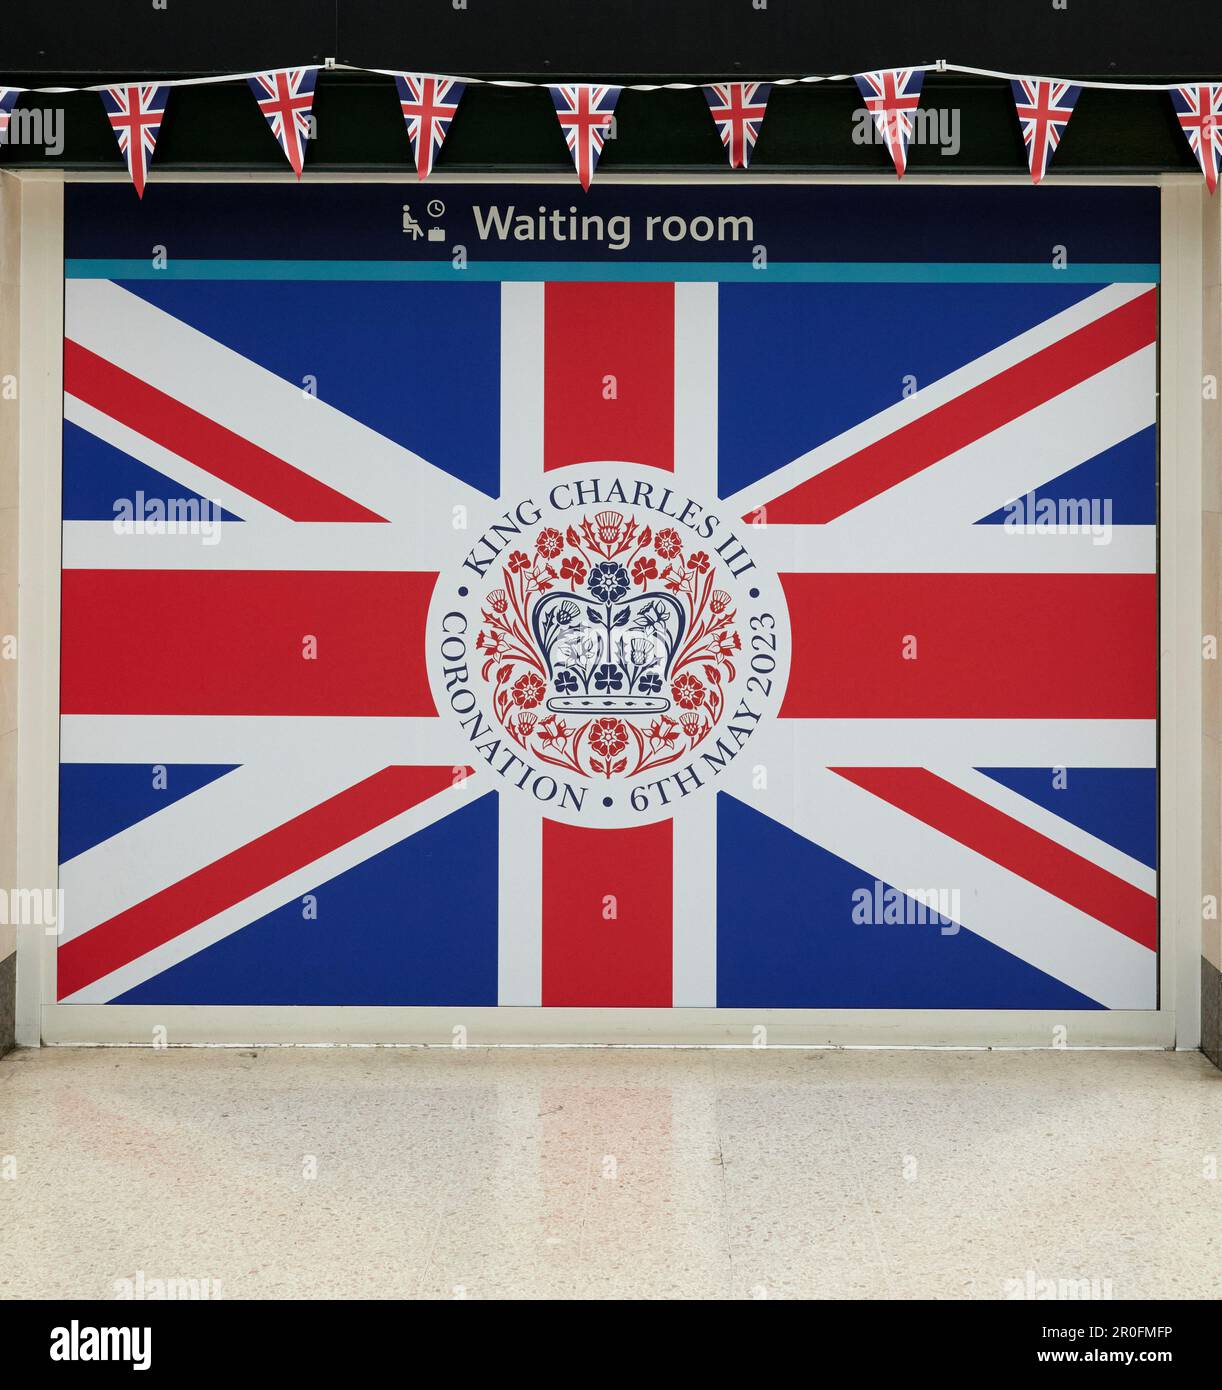 Union flag and coronation emblem over entrance to waiting room on councourse of Charing Cross station, London Stock Photo